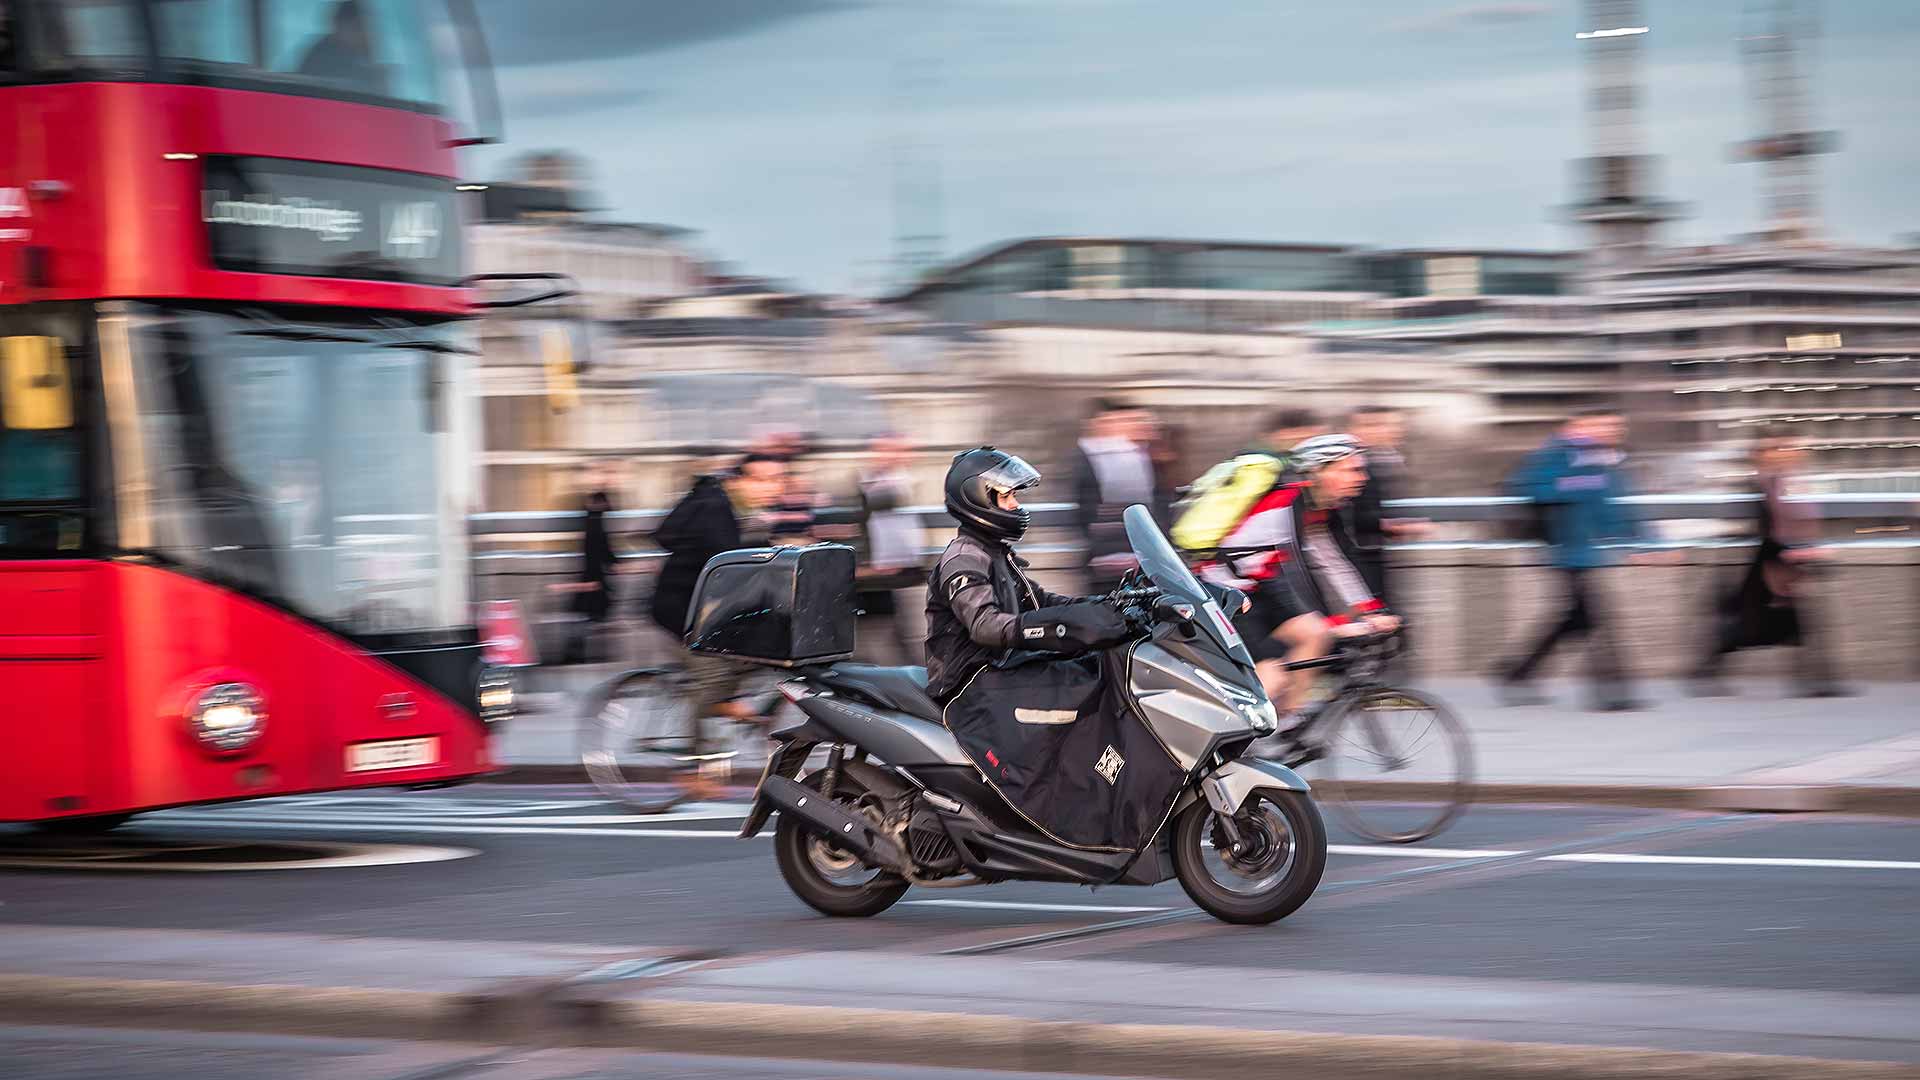 Scooter commuter in London